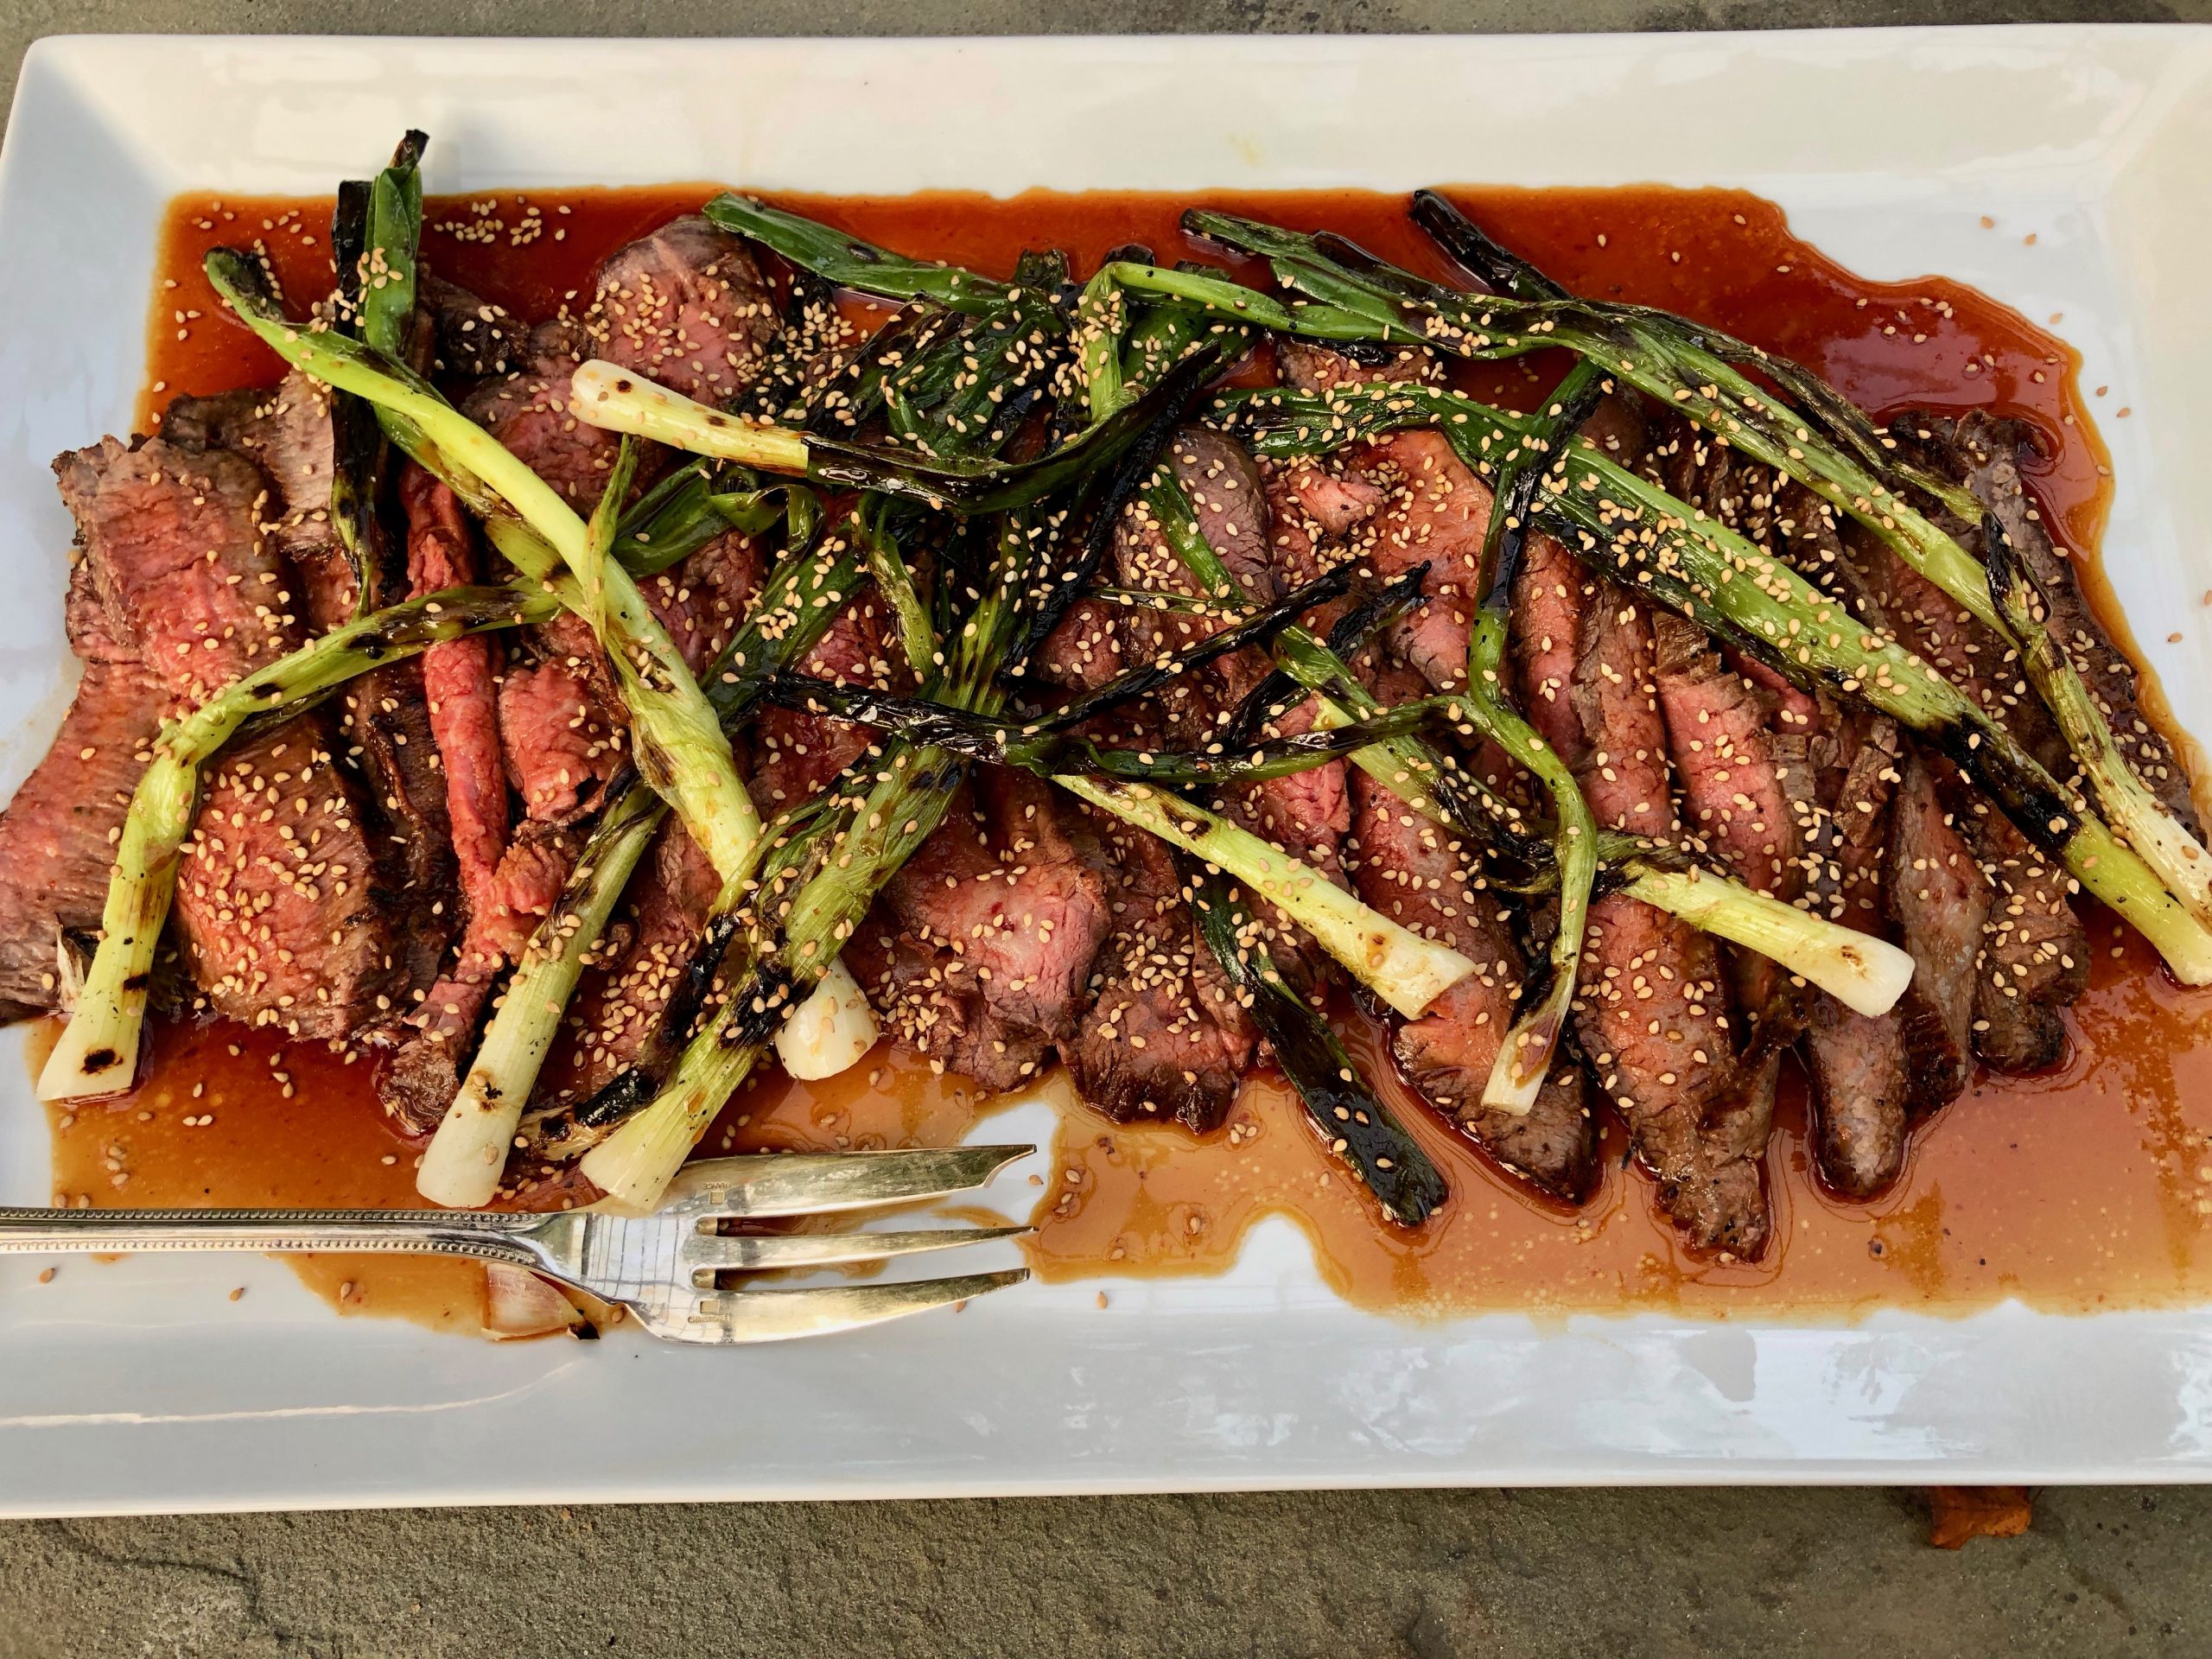 Grilled Flank Steak and Scallions with Soy-Mirin Sauce – Gluten Free